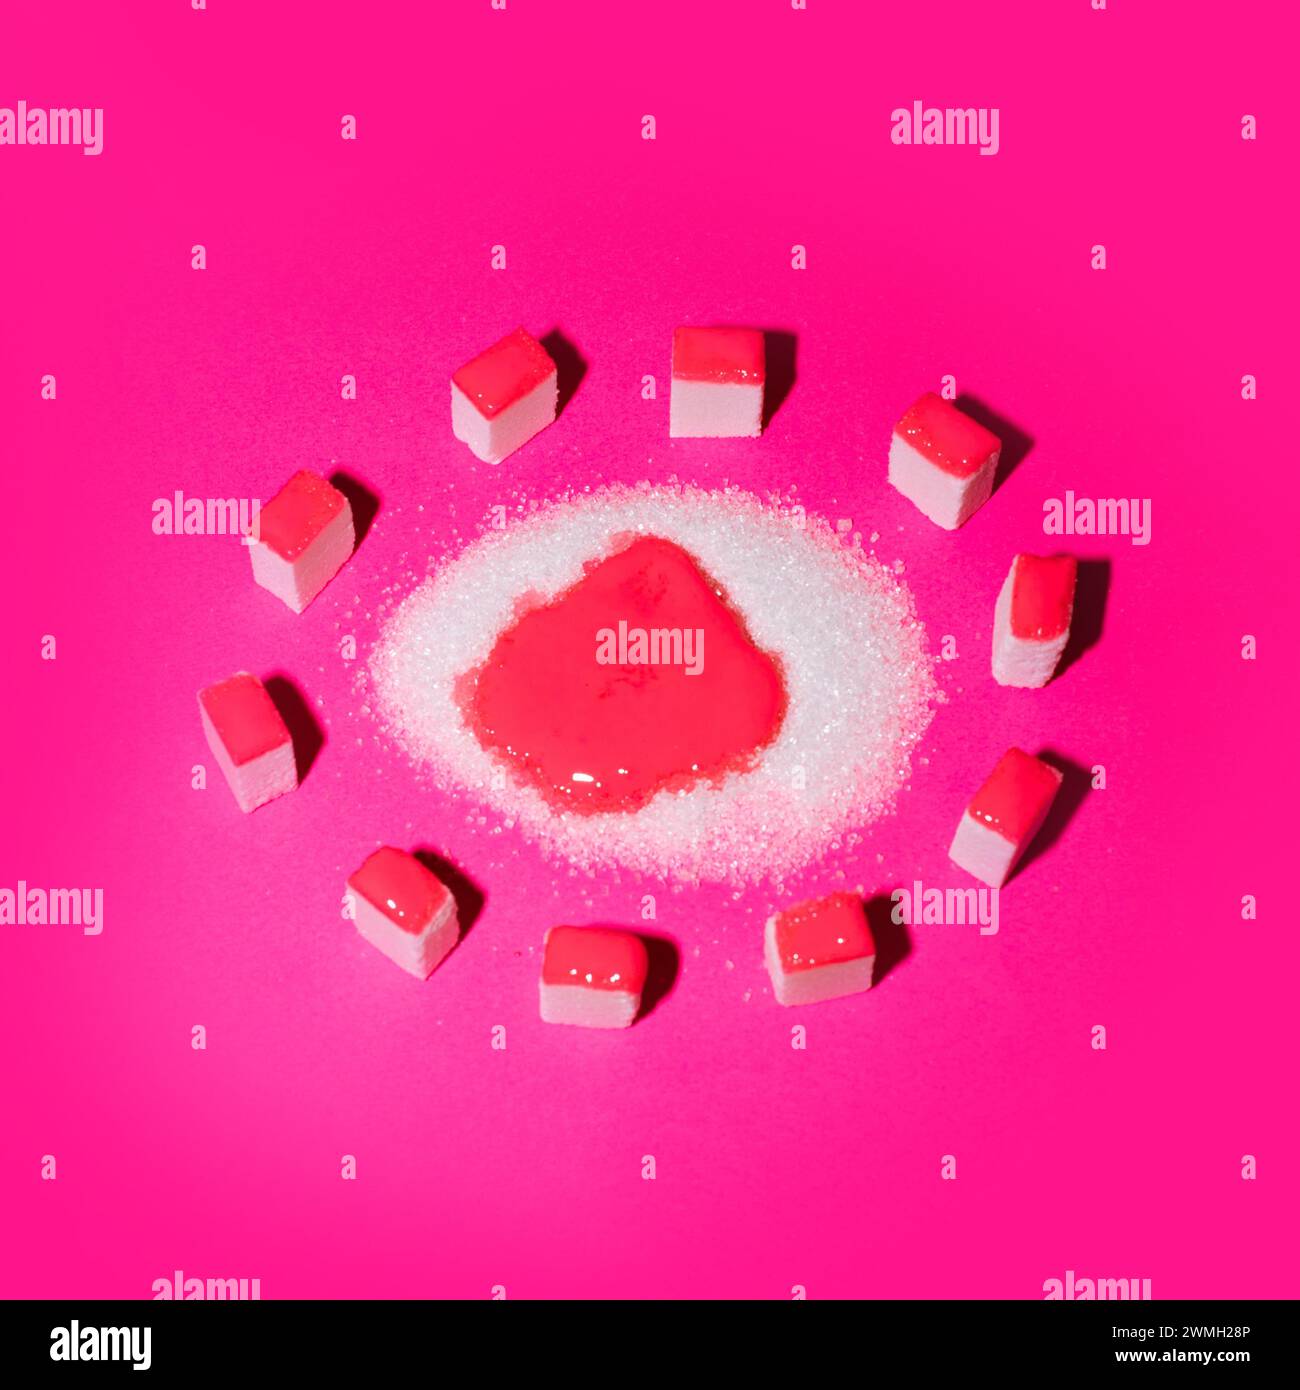 Sugar cubes surrounding sugar on a pink background. Crowd as food creative concept. Stock Photo